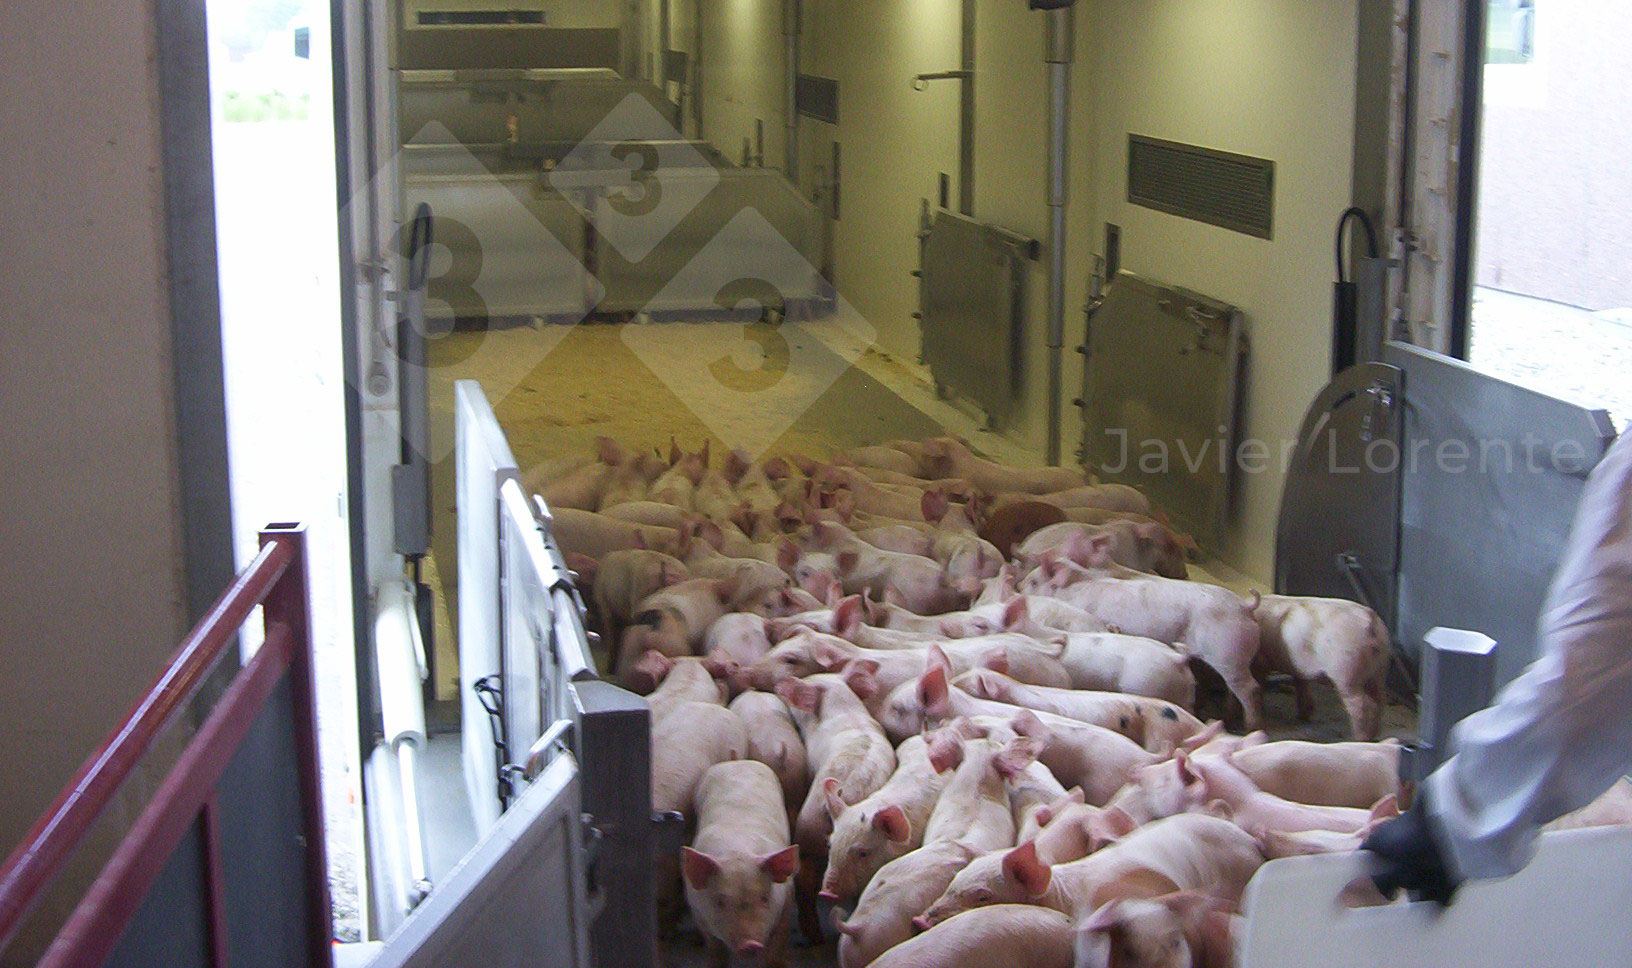 Piglets being loaded onto the truck